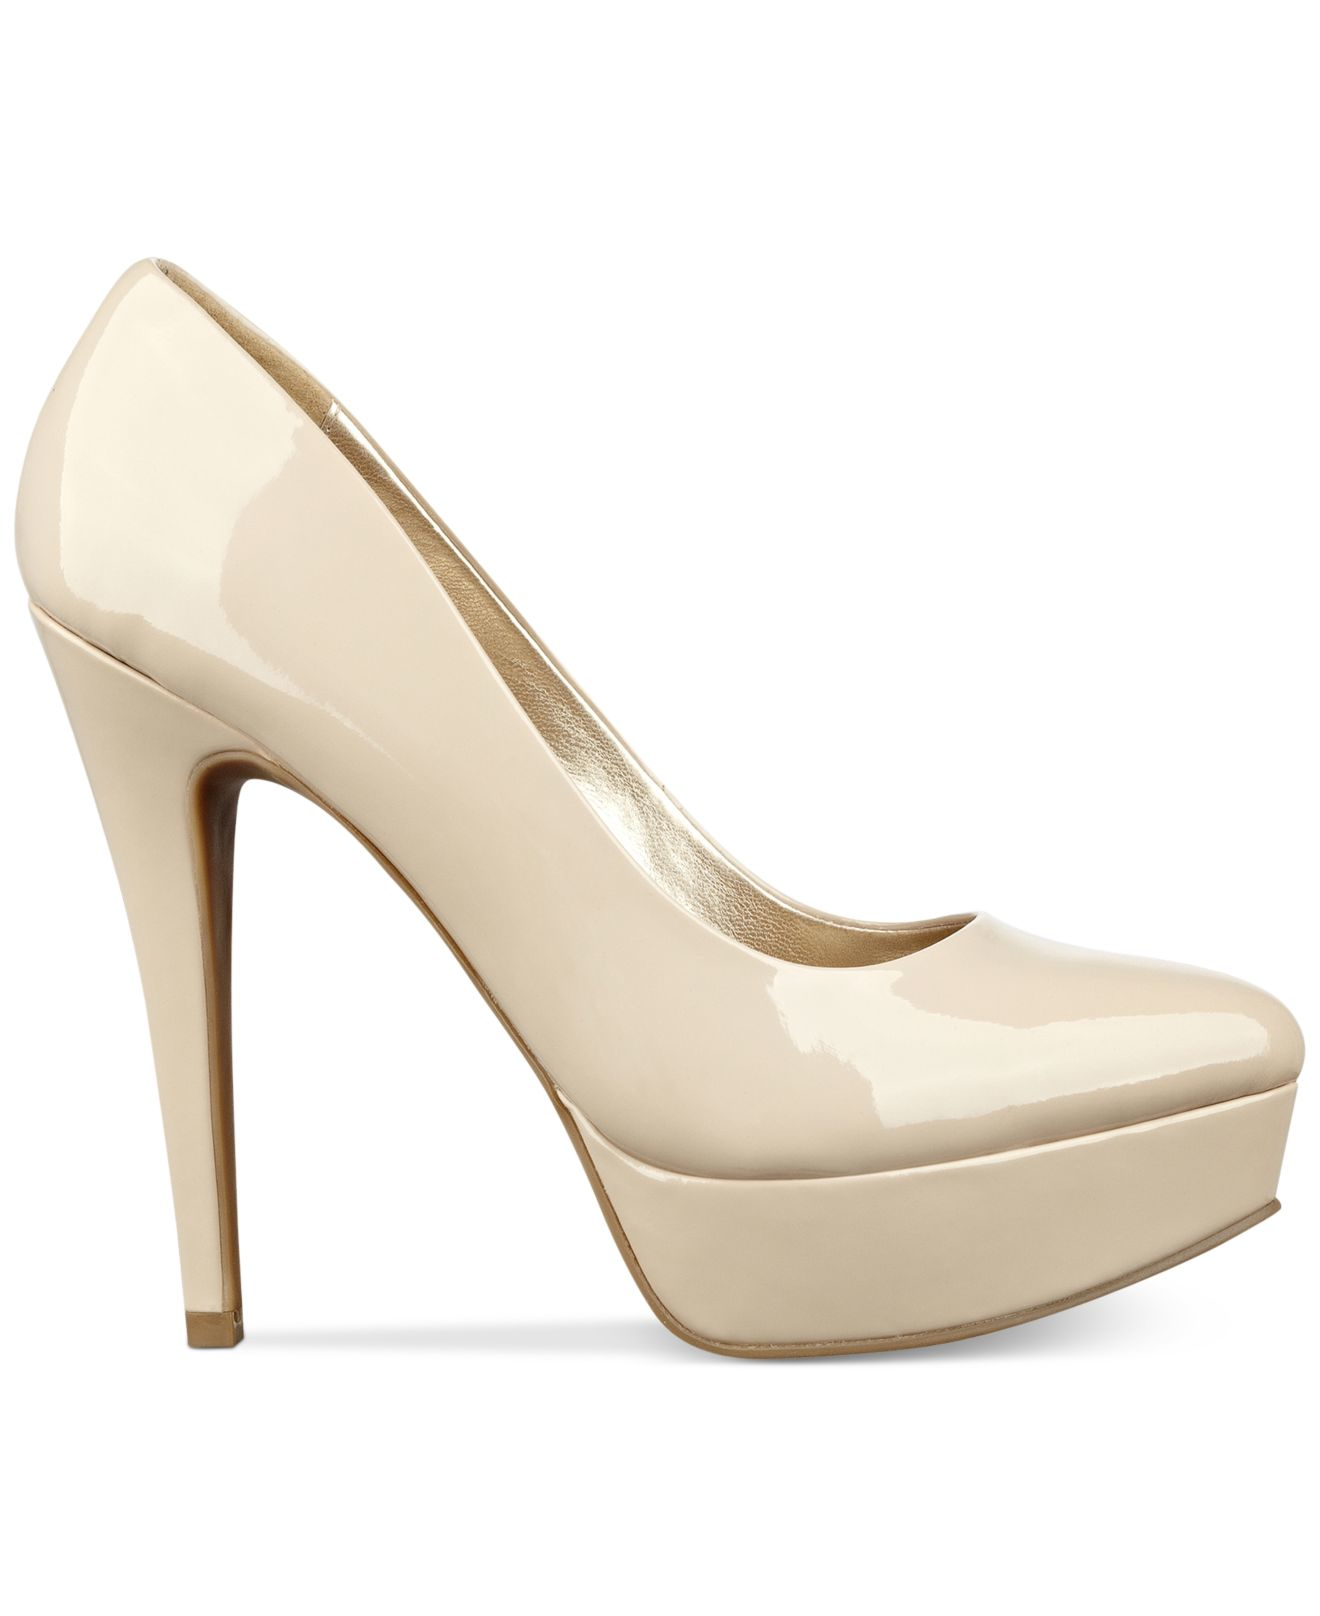 G By Guess Sofia Platform Pumps In Beige Sand Patent Lyst